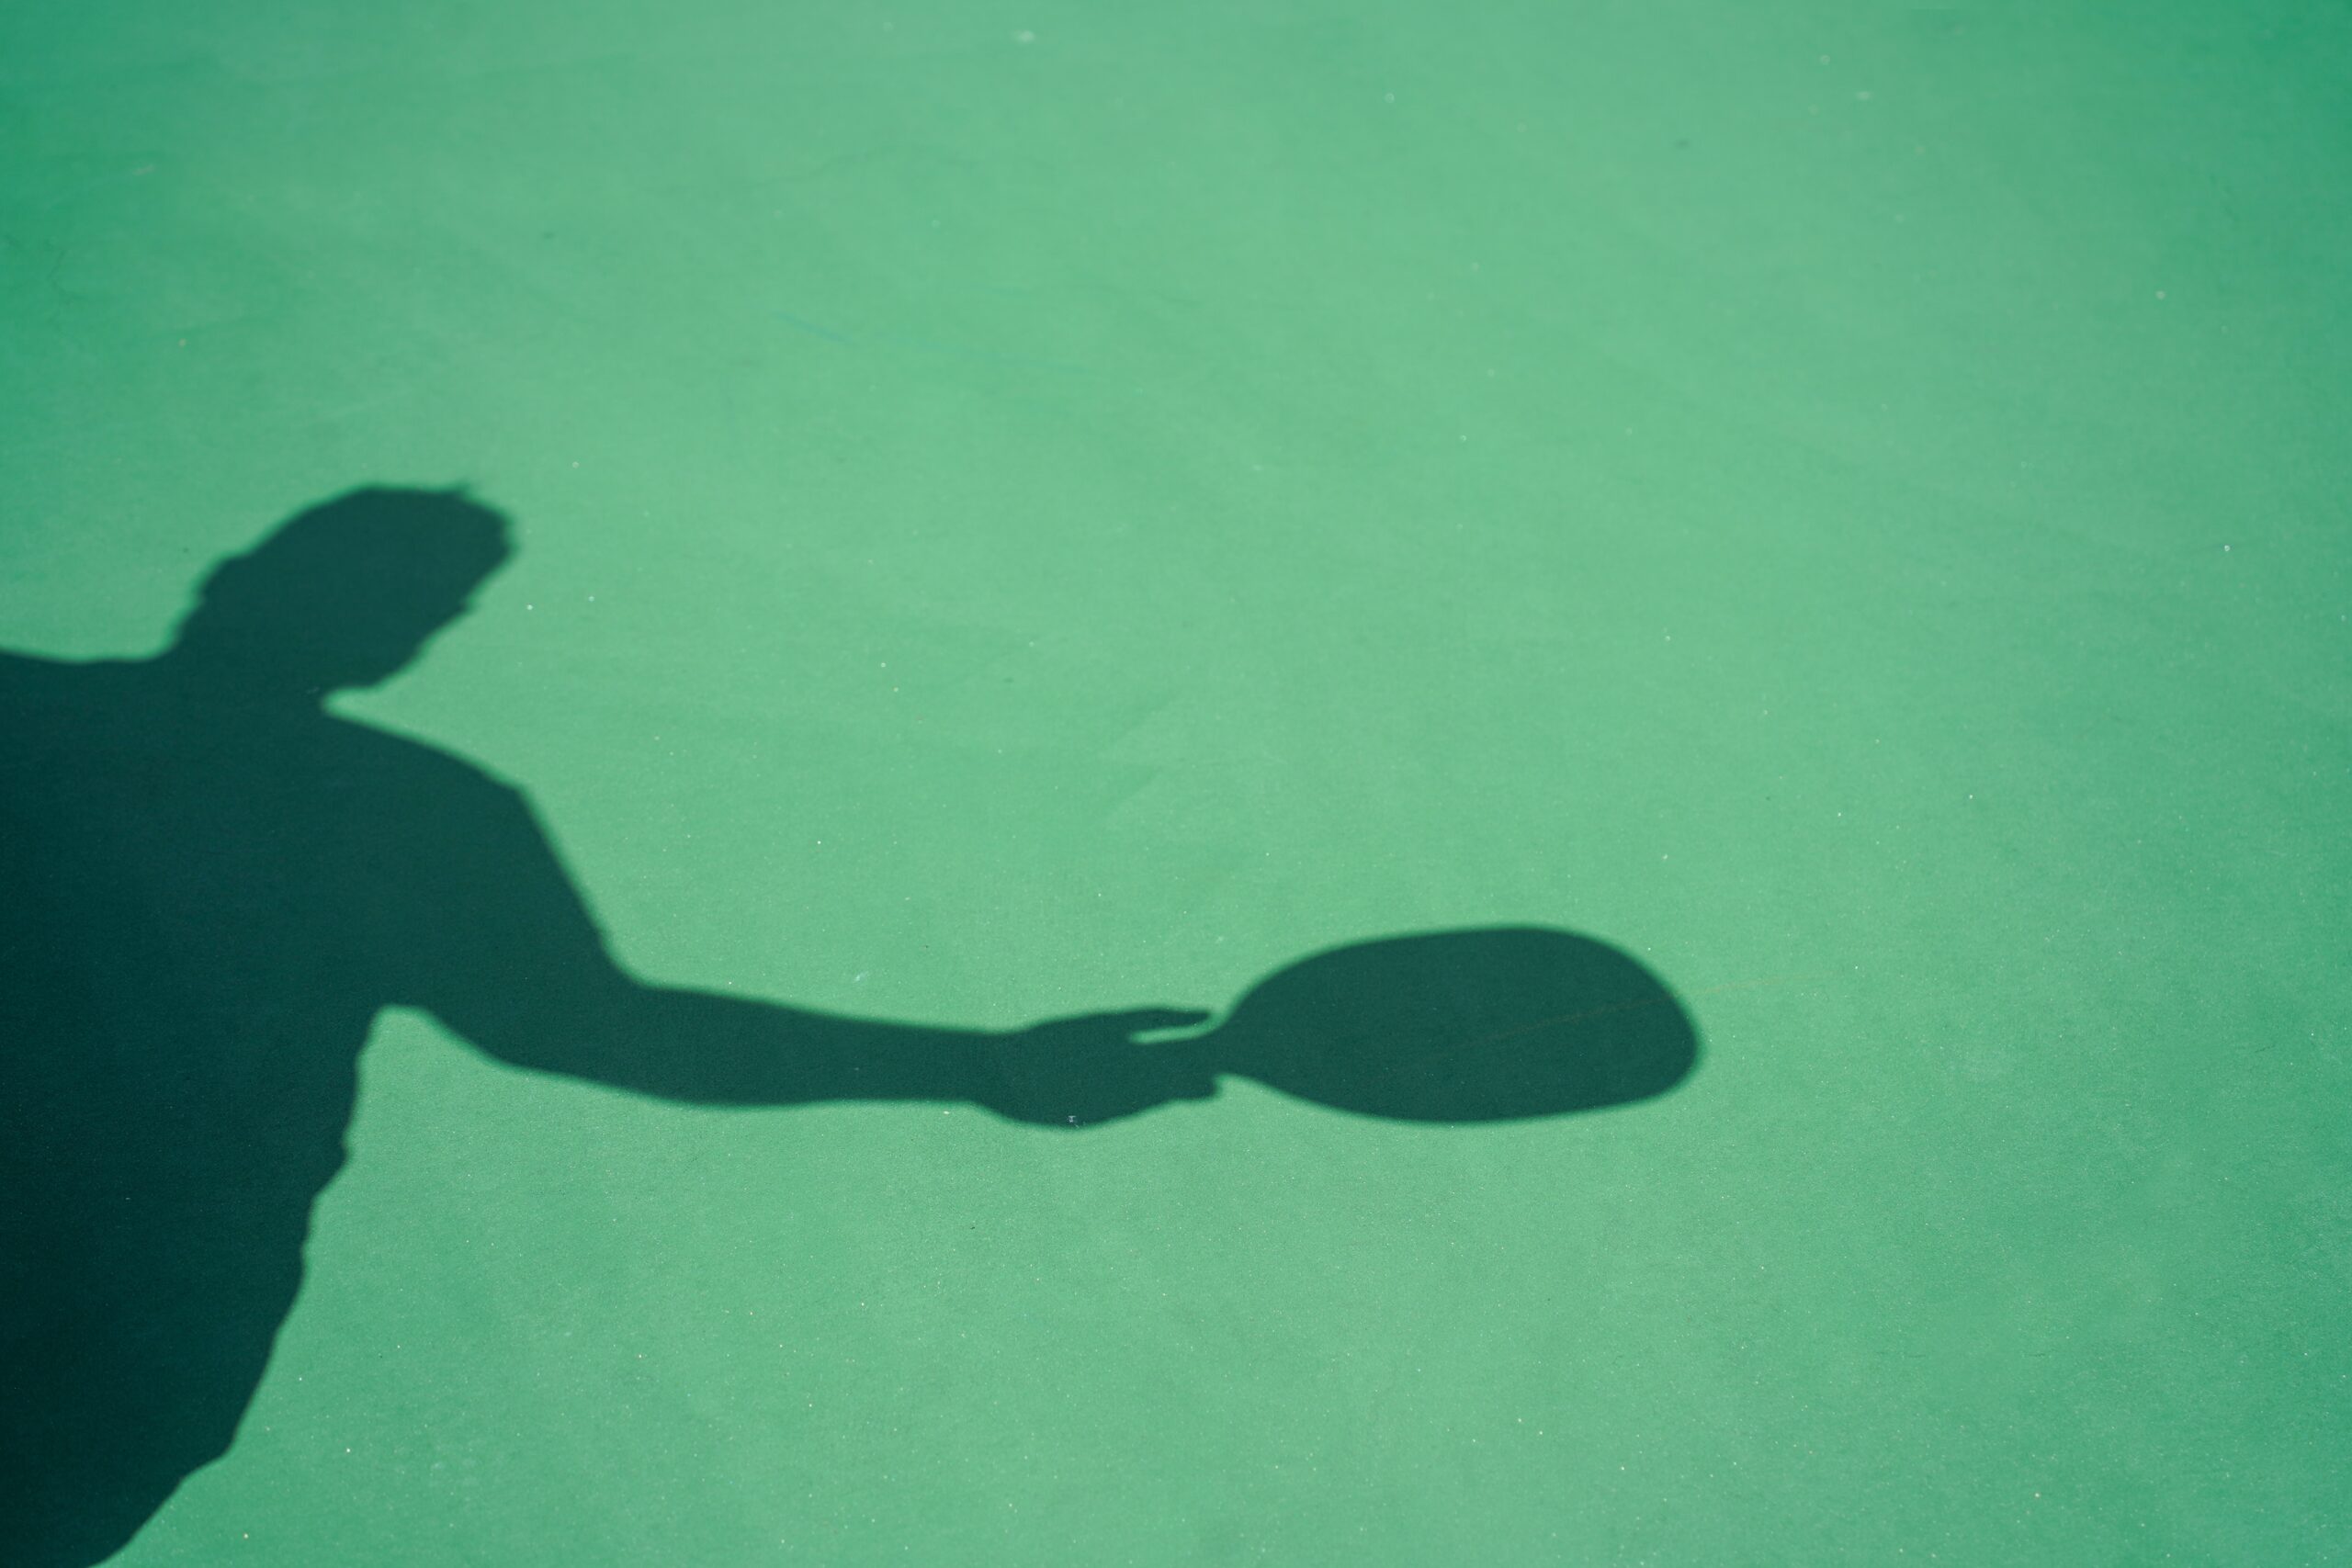 Silhouette,Outline,Of,A,Man,Playing,Pickleball.